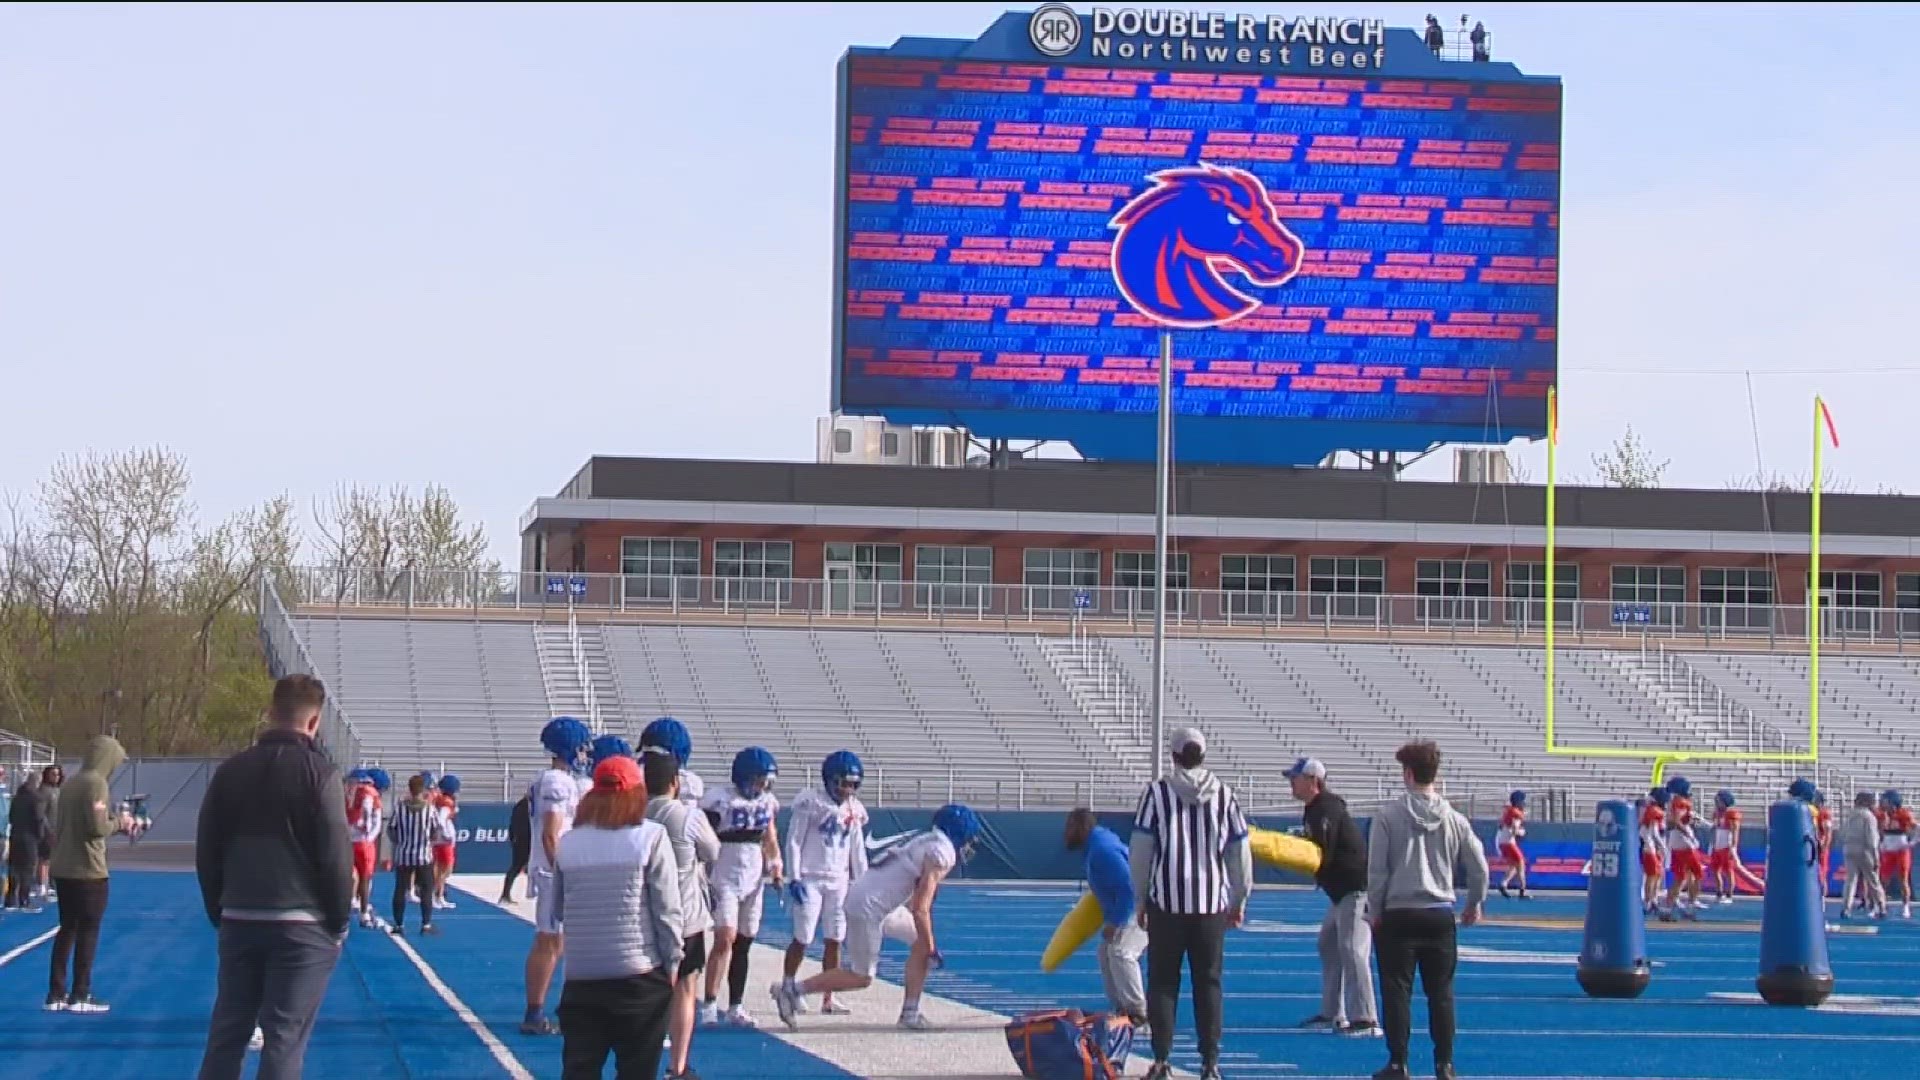 "I'm pretty excited about what we'll put on the field for the spring game," Michael Callahan said. "It's gonna be a really cool experience for Bronco Nation."